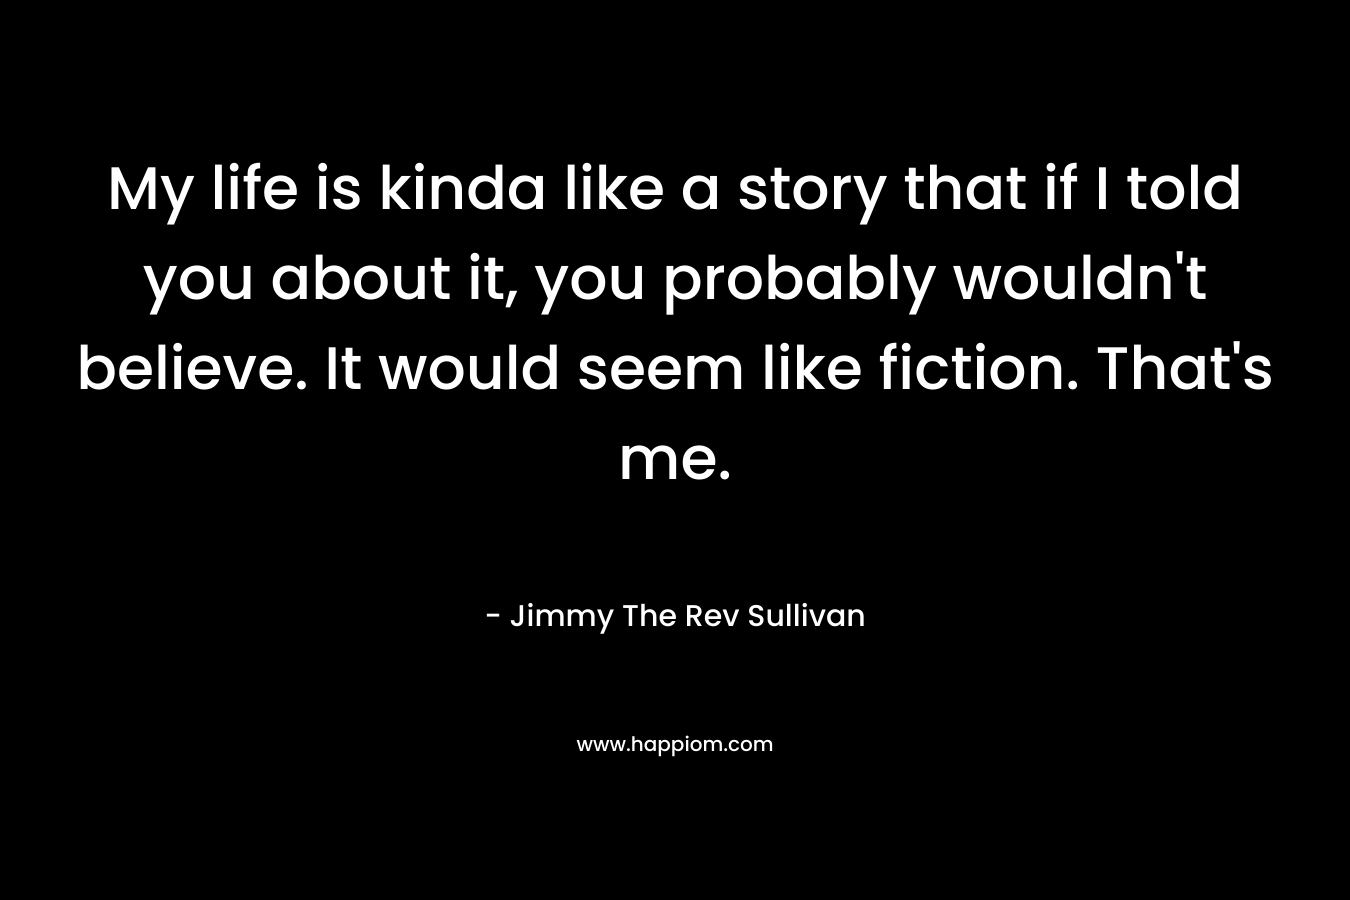 My life is kinda like a story that if I told you about it, you probably wouldn't believe. It would seem like fiction. That's me.